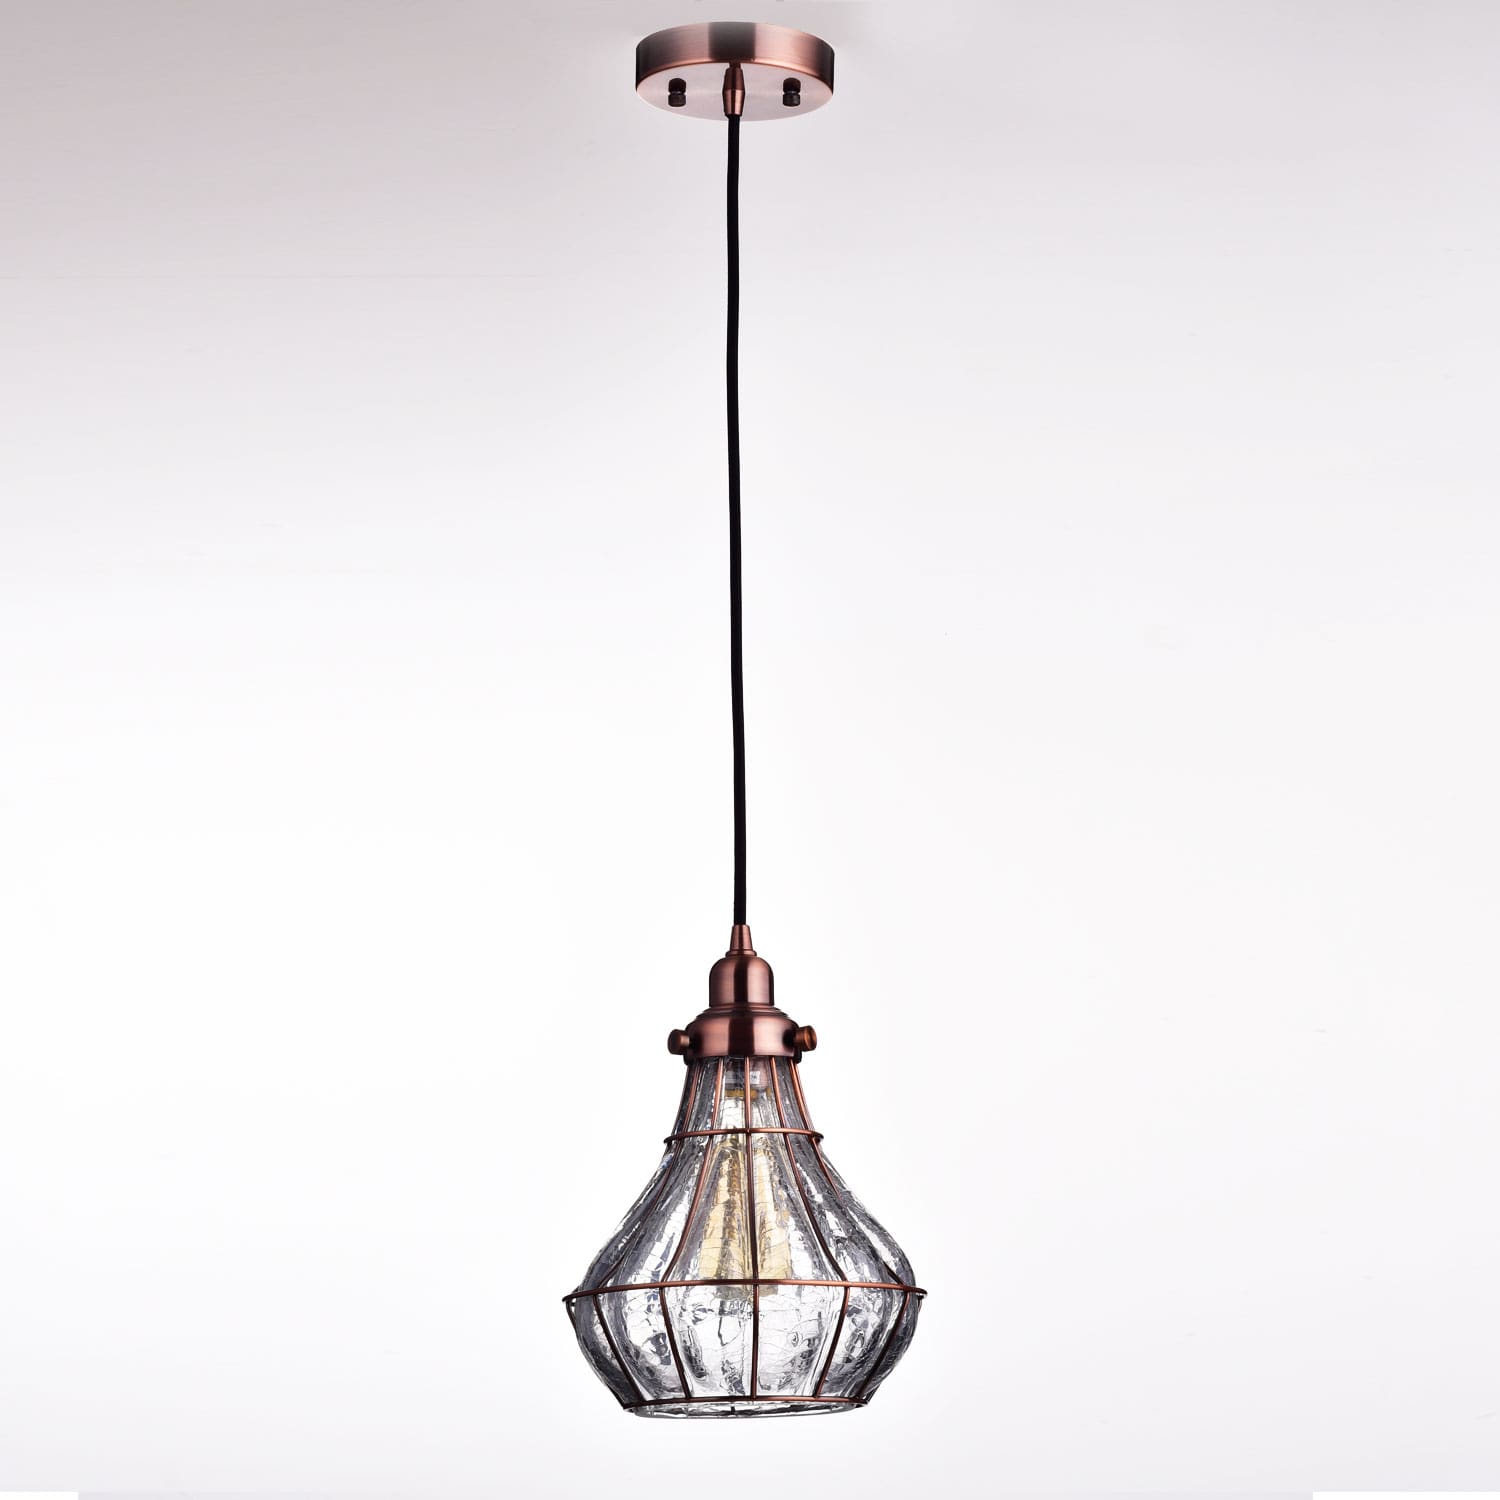 Rustic Cracked Glass Pendant Light Antique Red Copper Finish